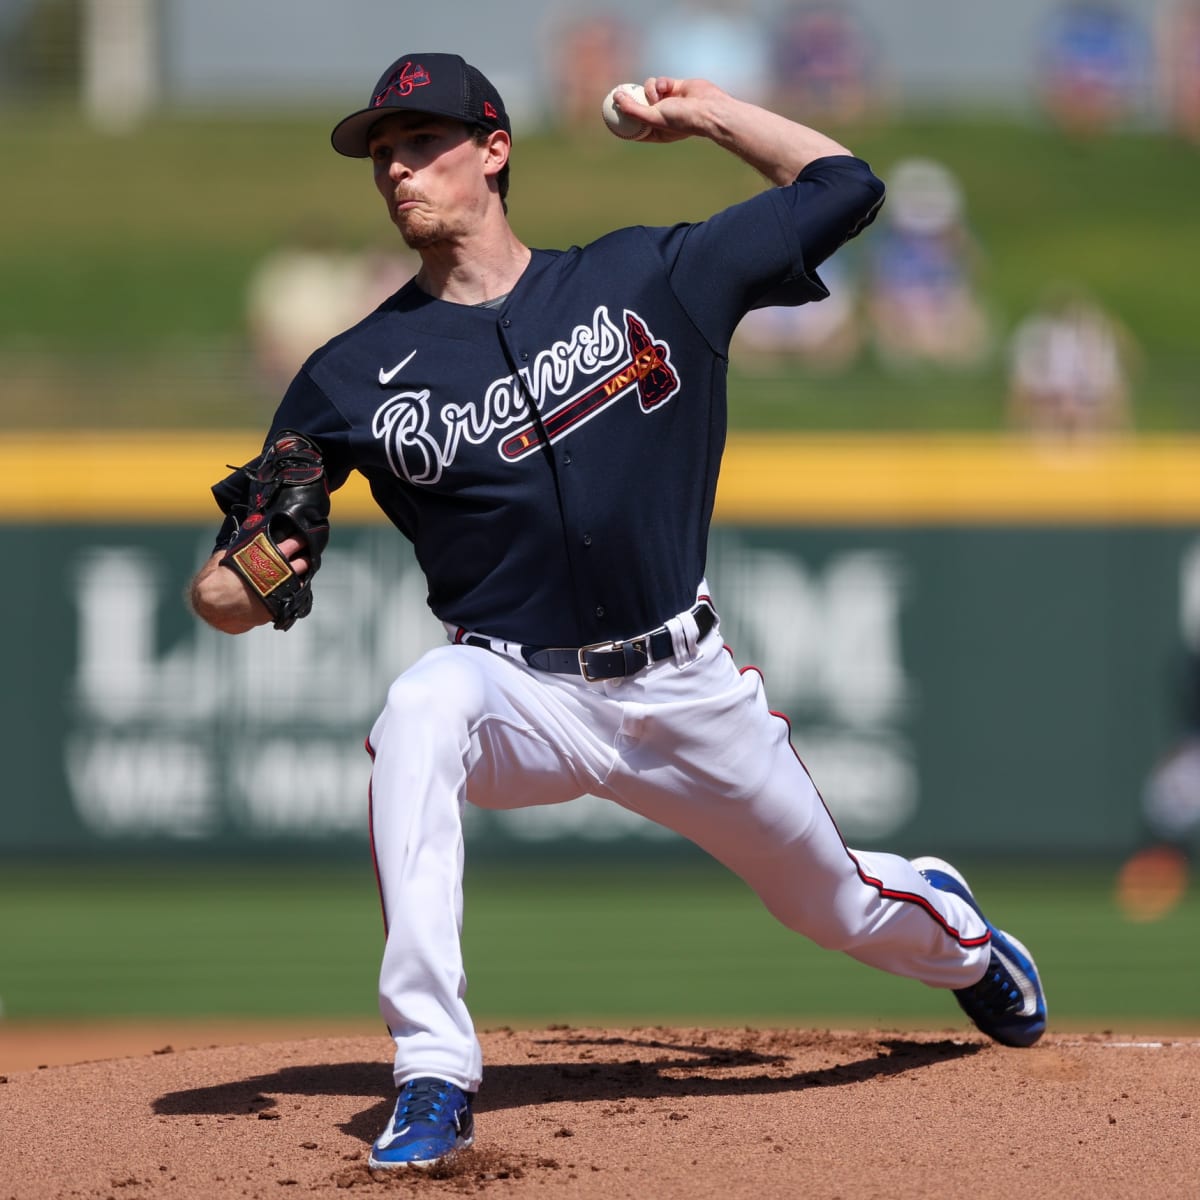 Max Fried Injury Update: Braves ace lands on 15-day IL, expected